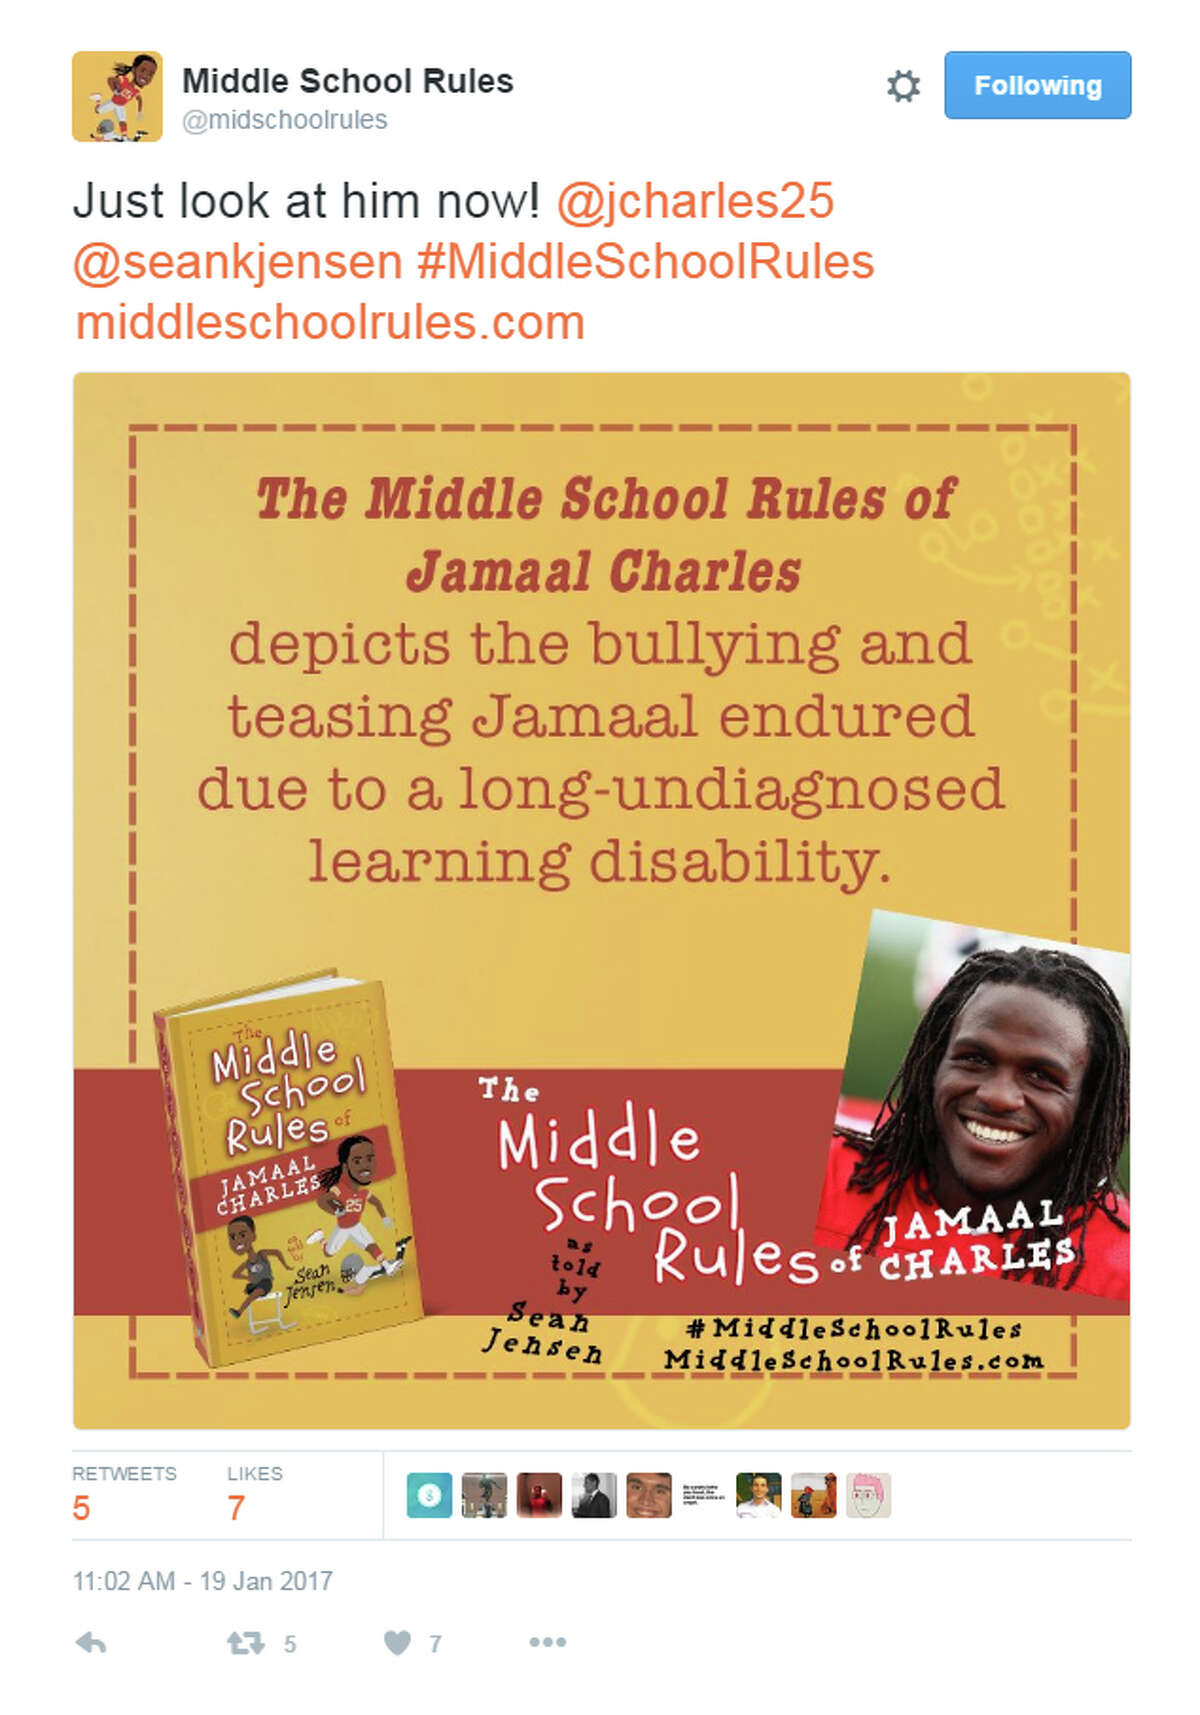 "The Middle School Rules of Jamaal Charles" is one of four books written by author Sean Jensen and features lesson's the Port Arthur Memorial graduate learned by growing up with a learning disability. Three other books in the series feature tales from WNBA star Skylar Diggins, and retired NFL stars Charles Tillman and Brian Urlacher. (Twitter.com/midschoolrules)